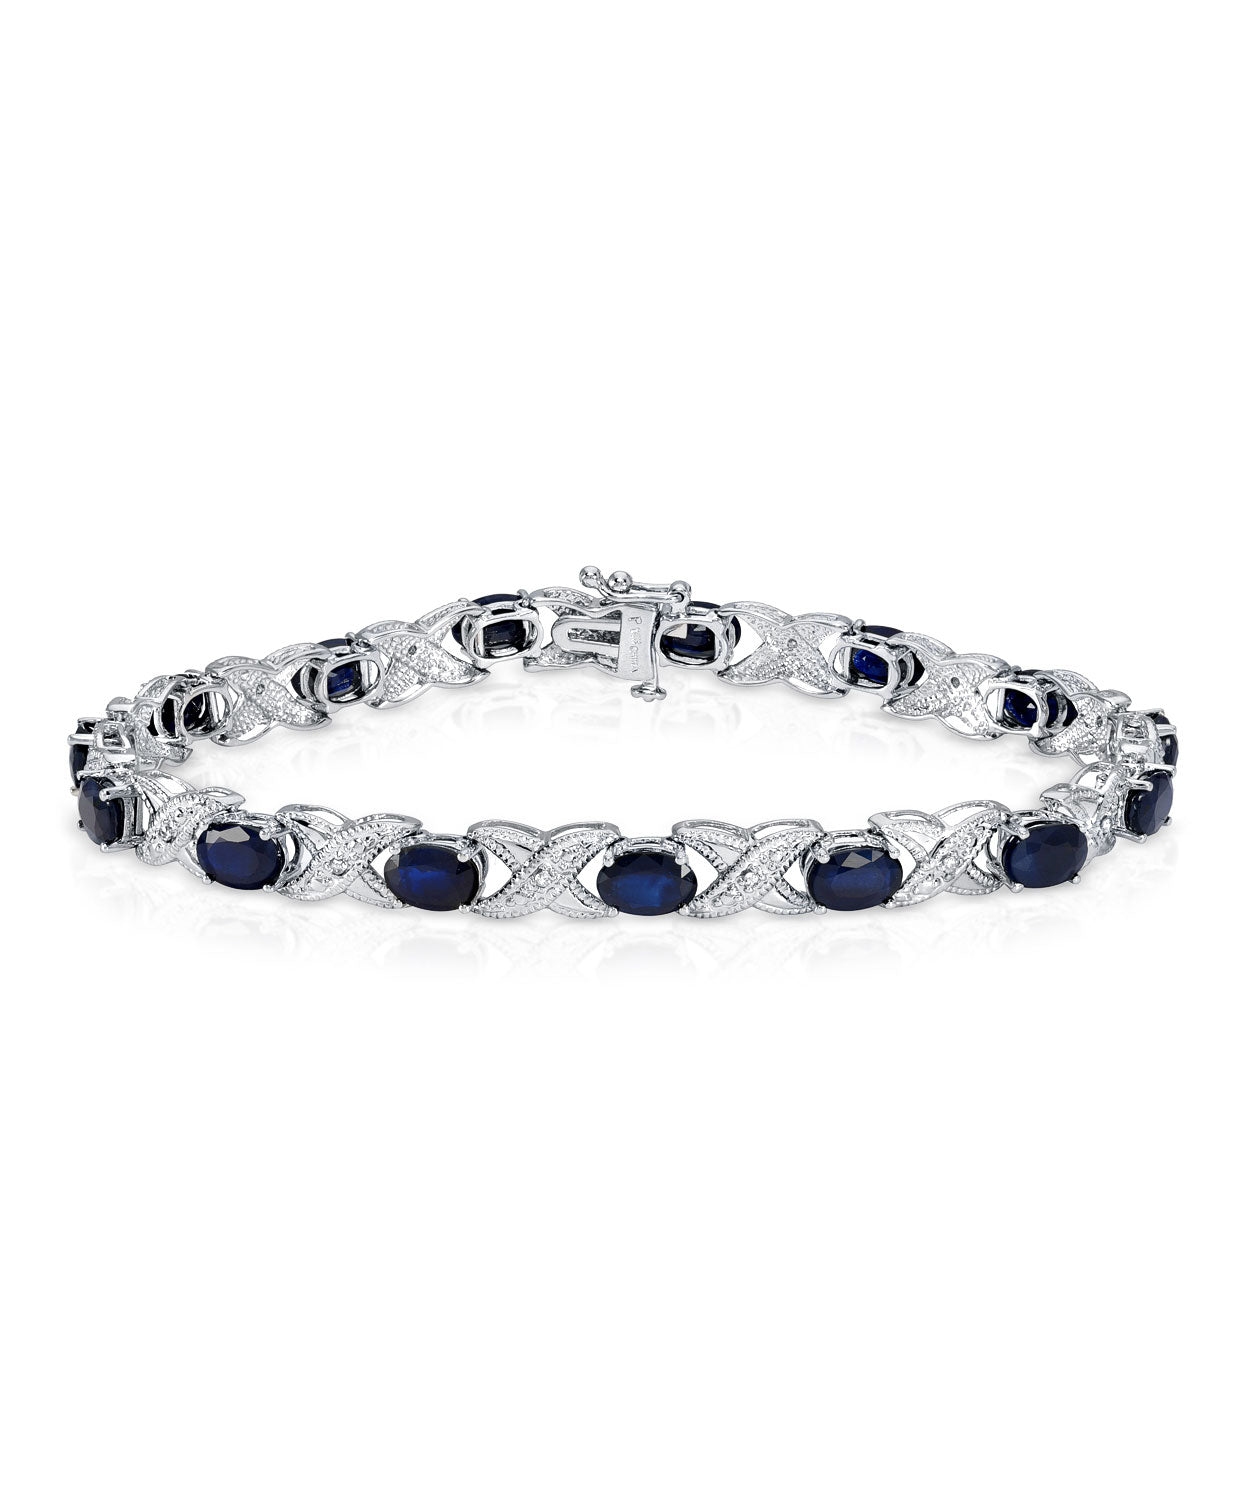 8.44ctw Natural Midnight Blue Sapphire and Diamond 14k Gold Link Bracelet View 1